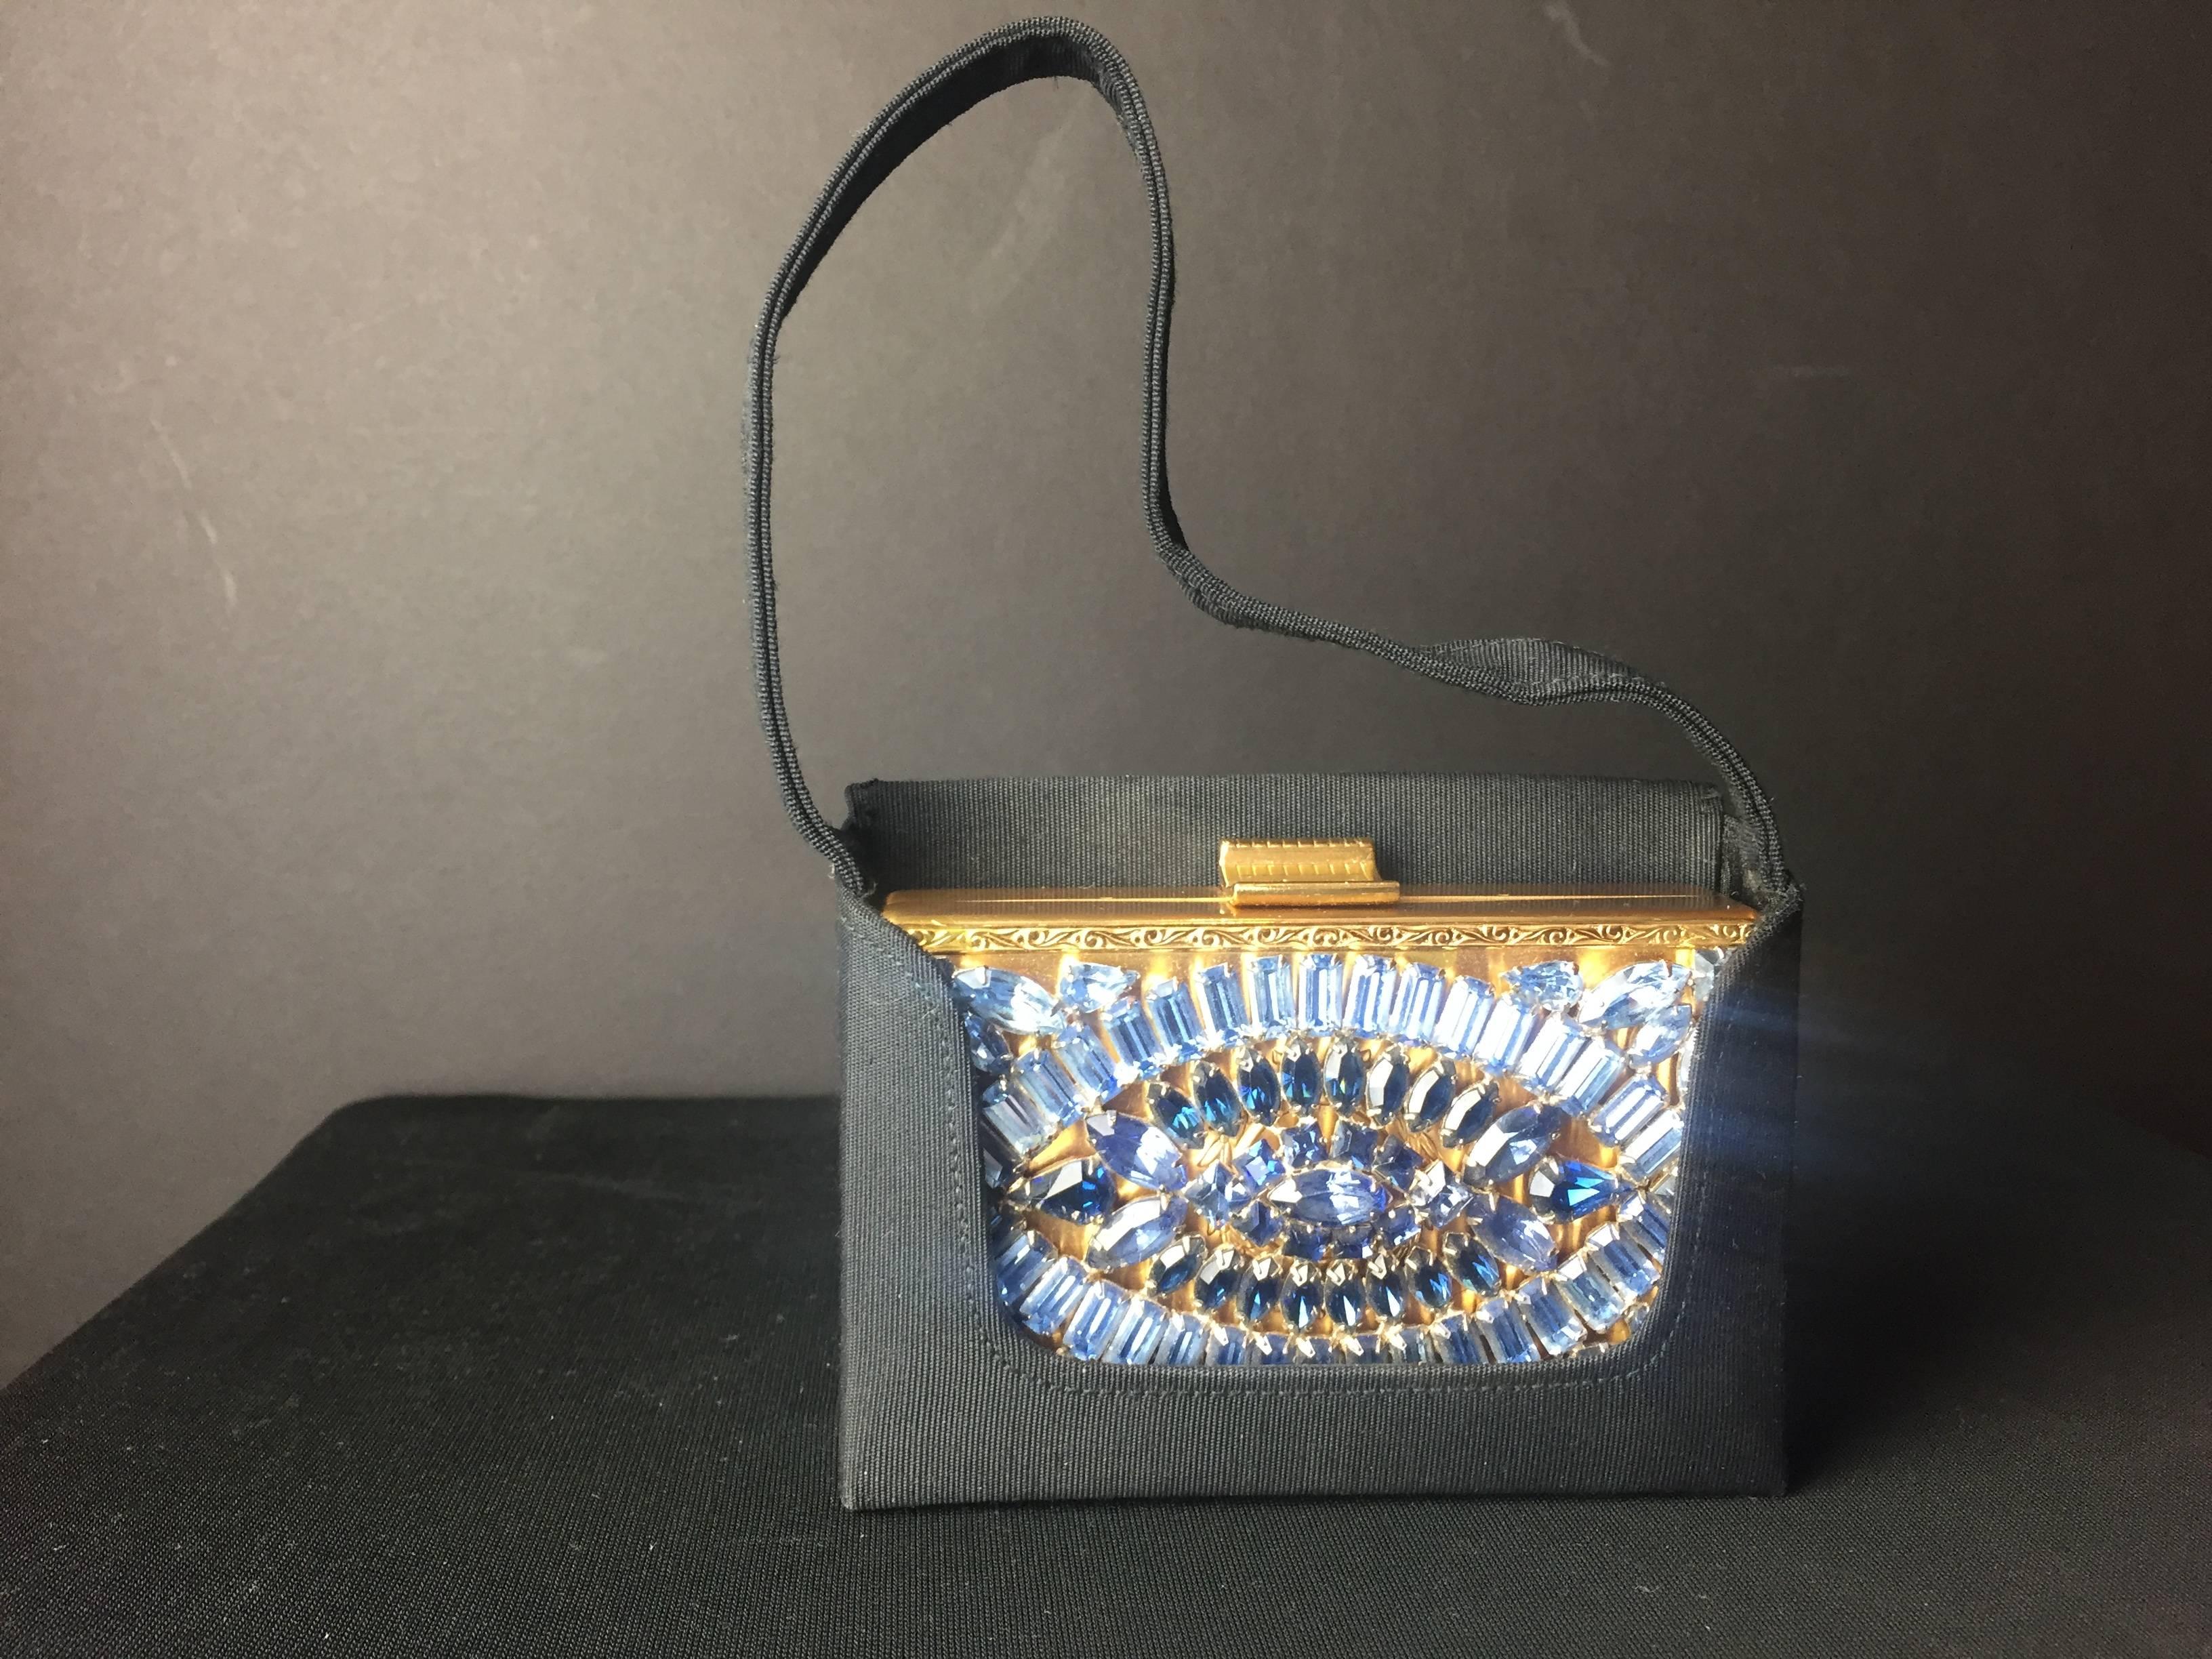 Fantastic evening bag/minaudiere encrusted with faux sapphires and aquamarines arranged in the shape of an eye. Pristine condition. Never used and offered with it's original grosgrain carrying case and box. The interior comprises powder compartment